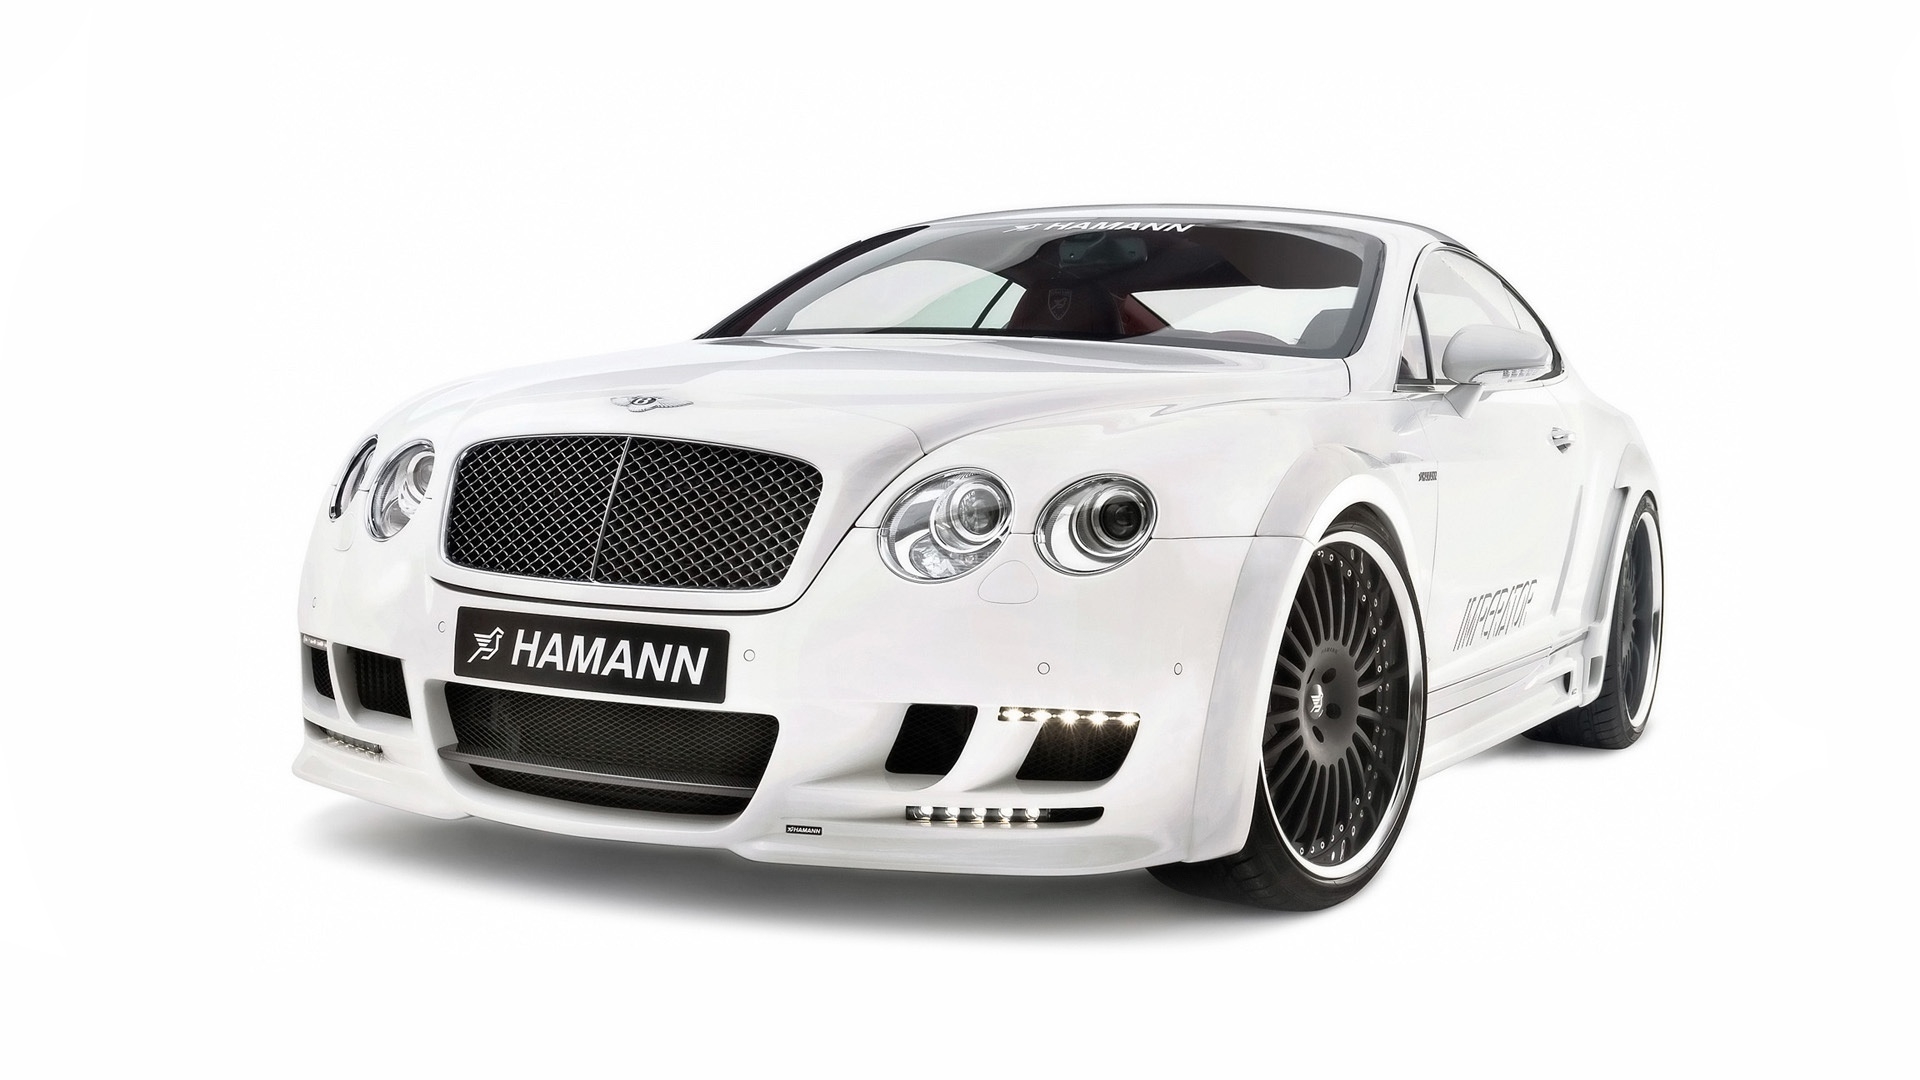 2009 Hamann Imperator based on Bentley Continental GT for 1920 x 1080 HDTV 1080p resolution